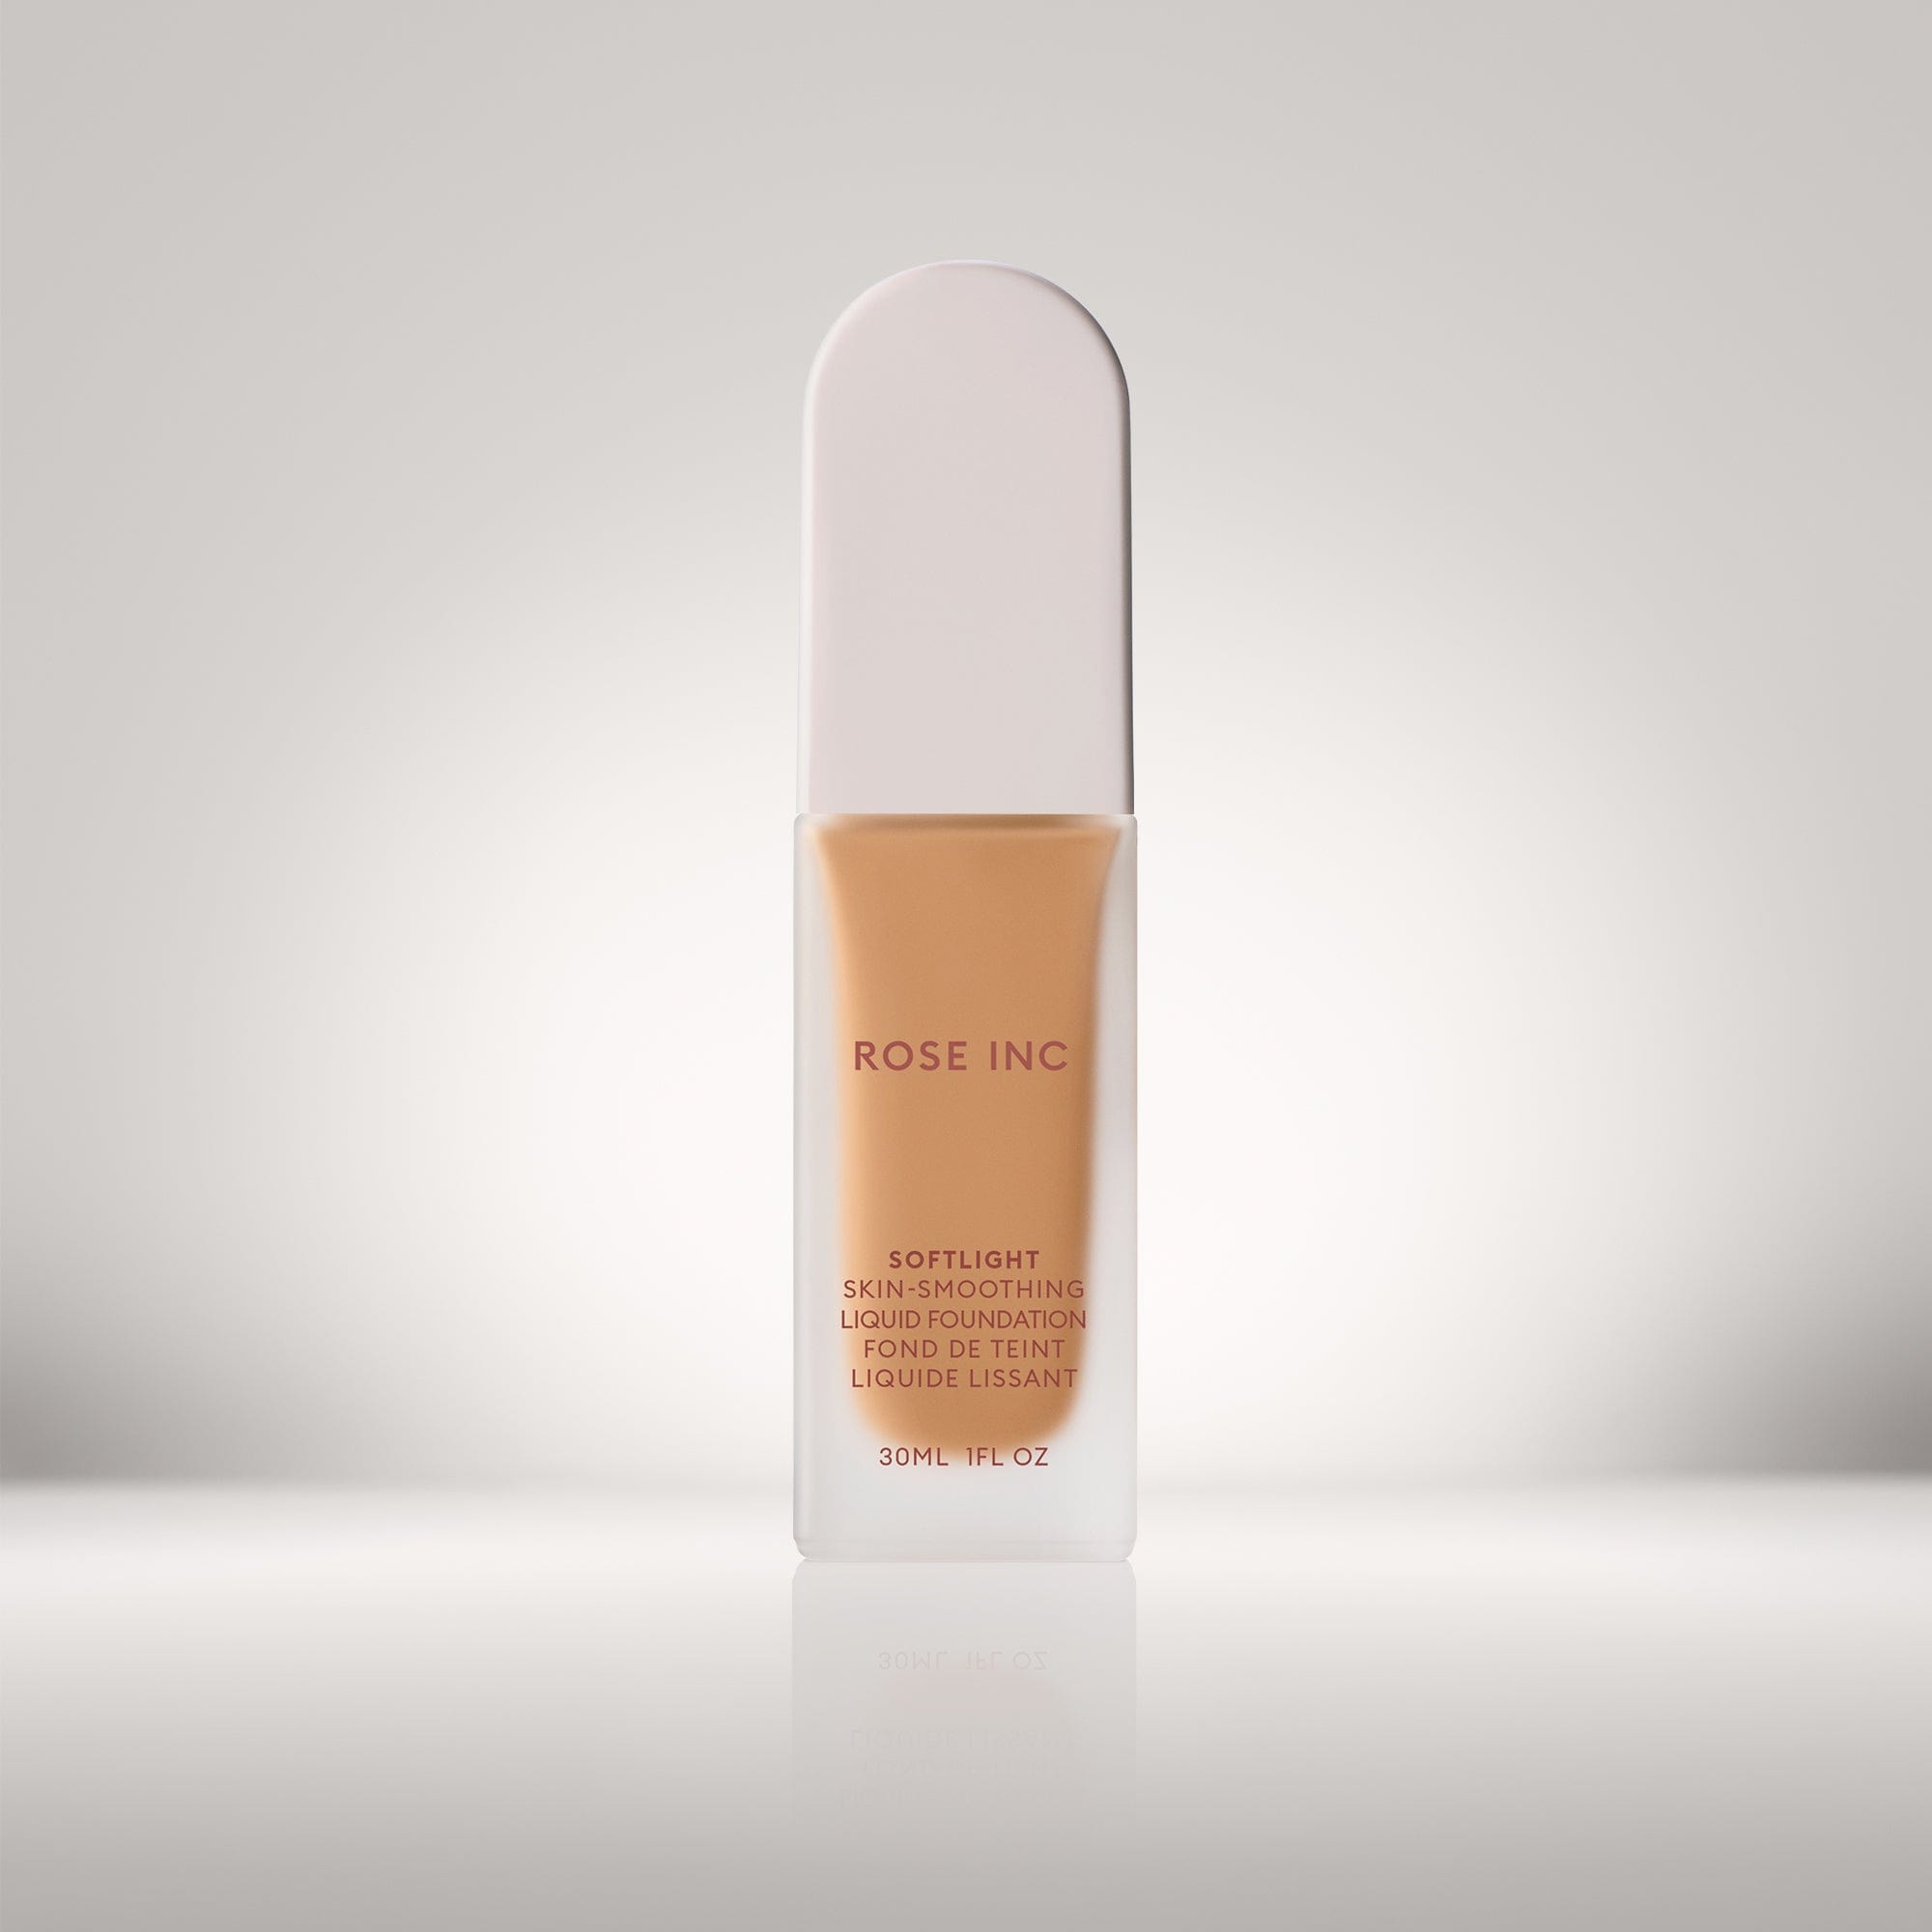 Soldier image of shade 20N in Softlight Smoothing Foundation